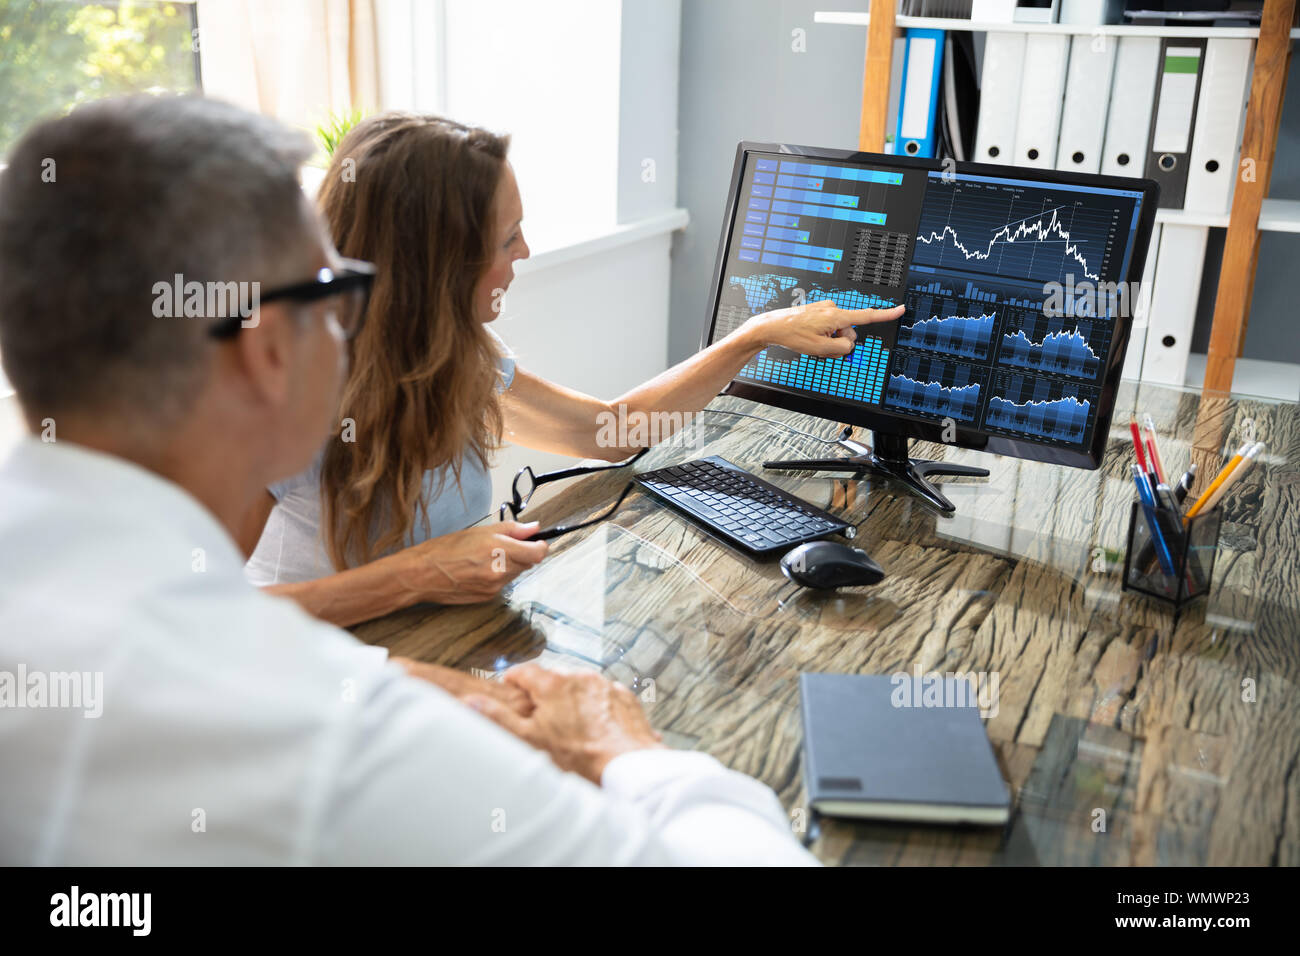 Side View Of Two Stock Market Brokers Discussing Graphs On Computer At Workplace Stock Photo